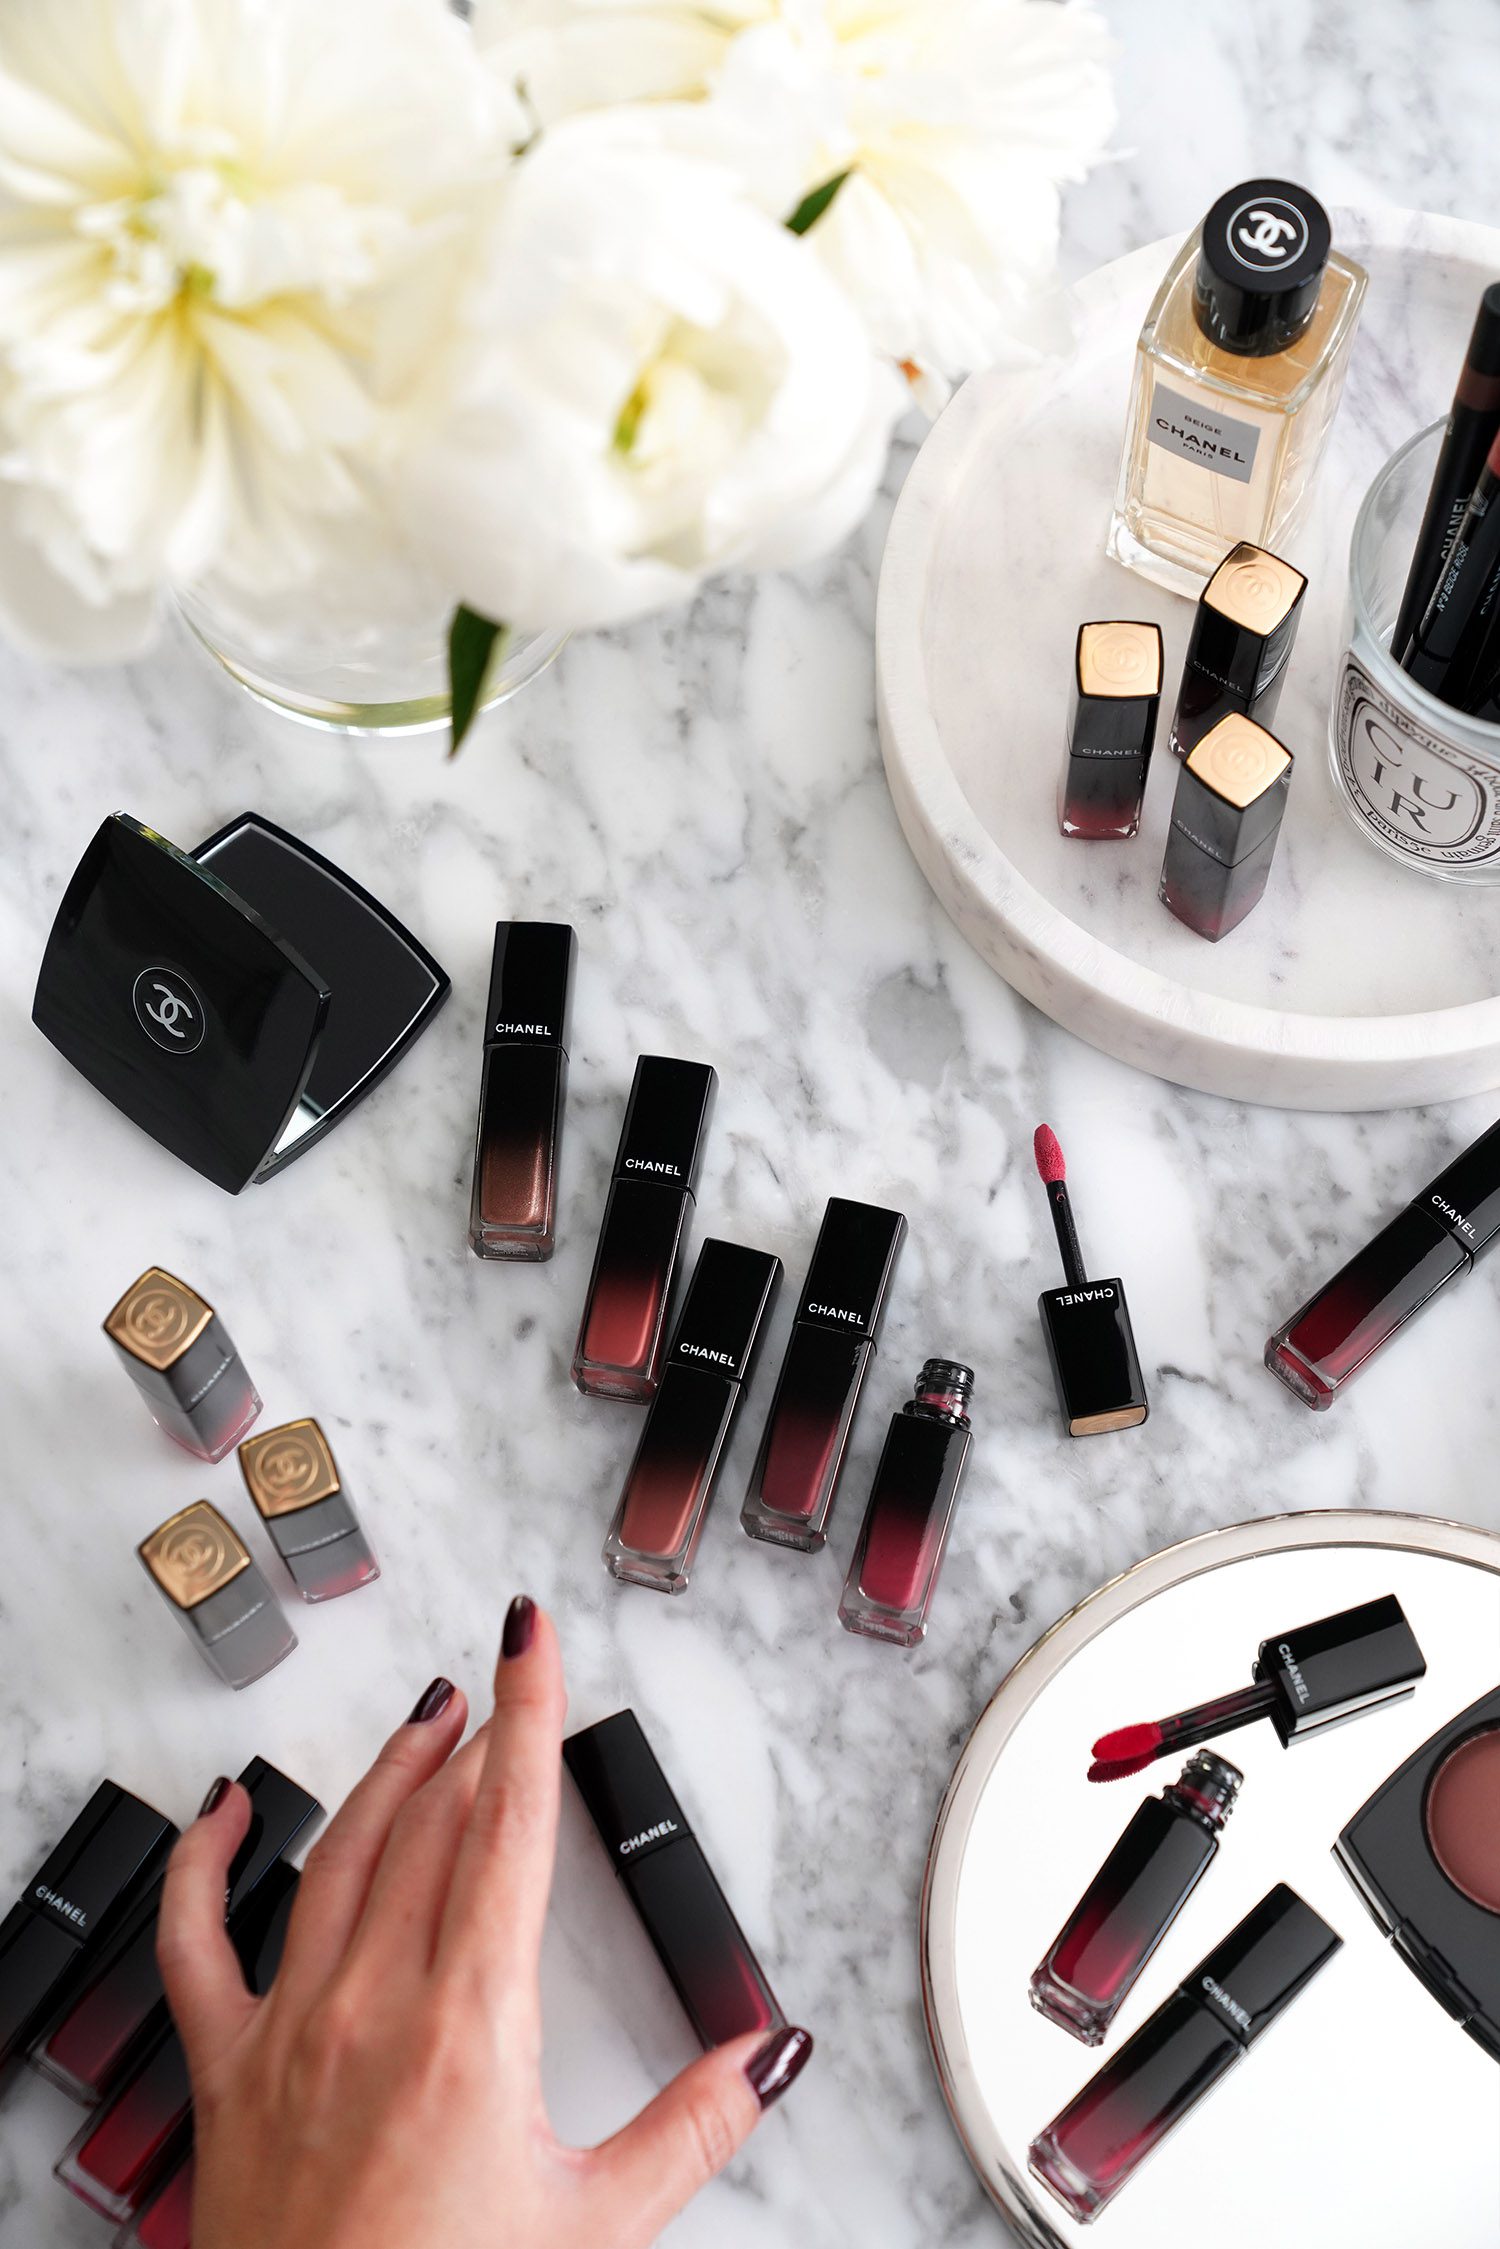 Chanel Rouge Allure Laque Swatches Part 2 - The Beauty Look Book